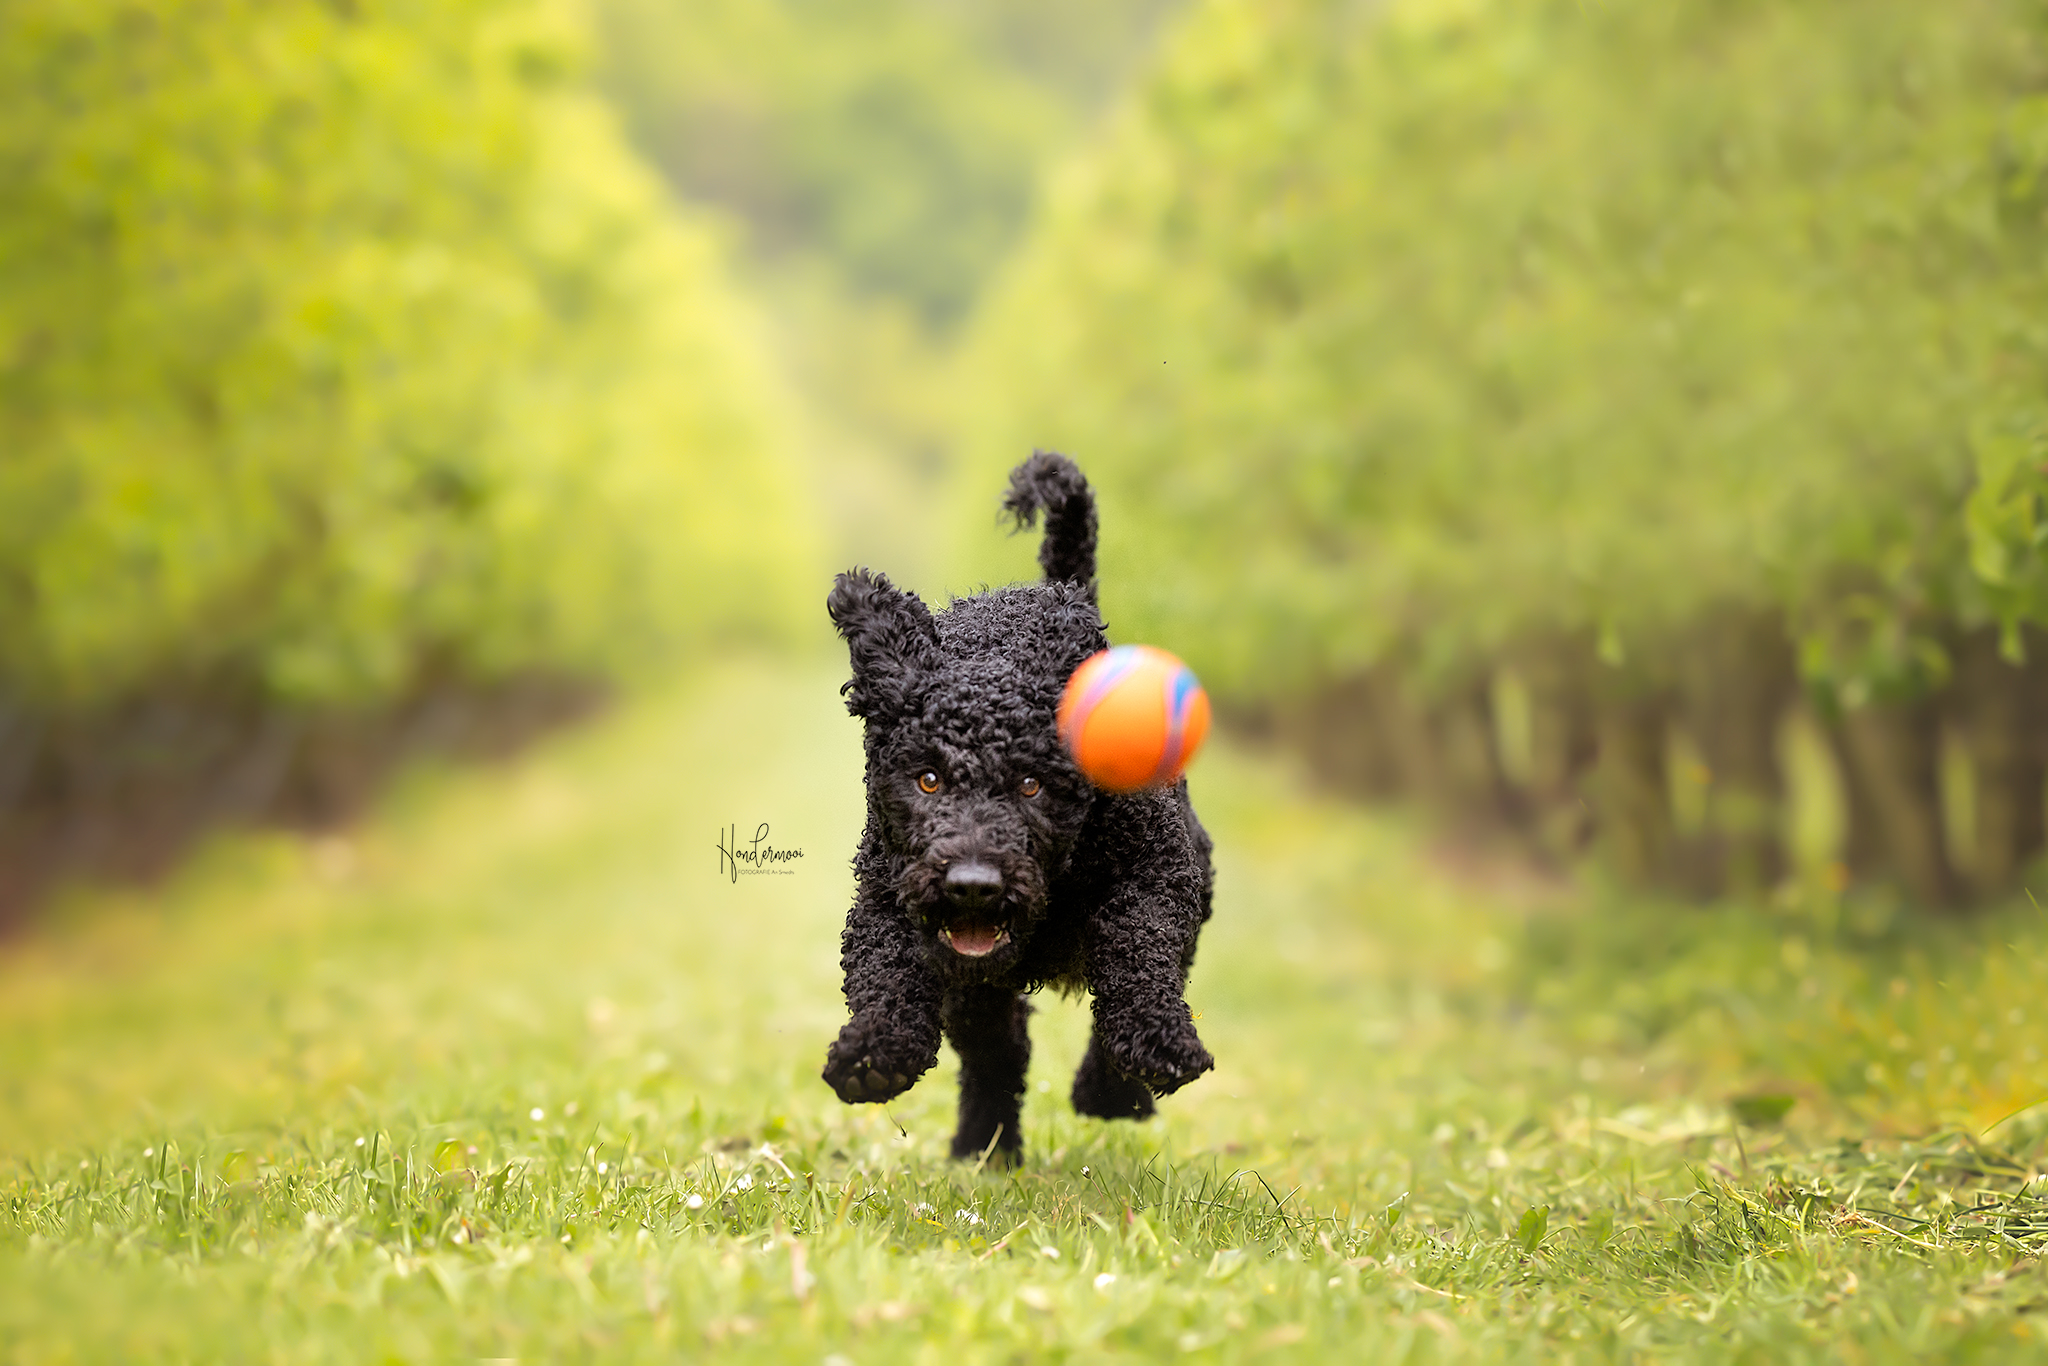 10 tips for photographing dogs in action